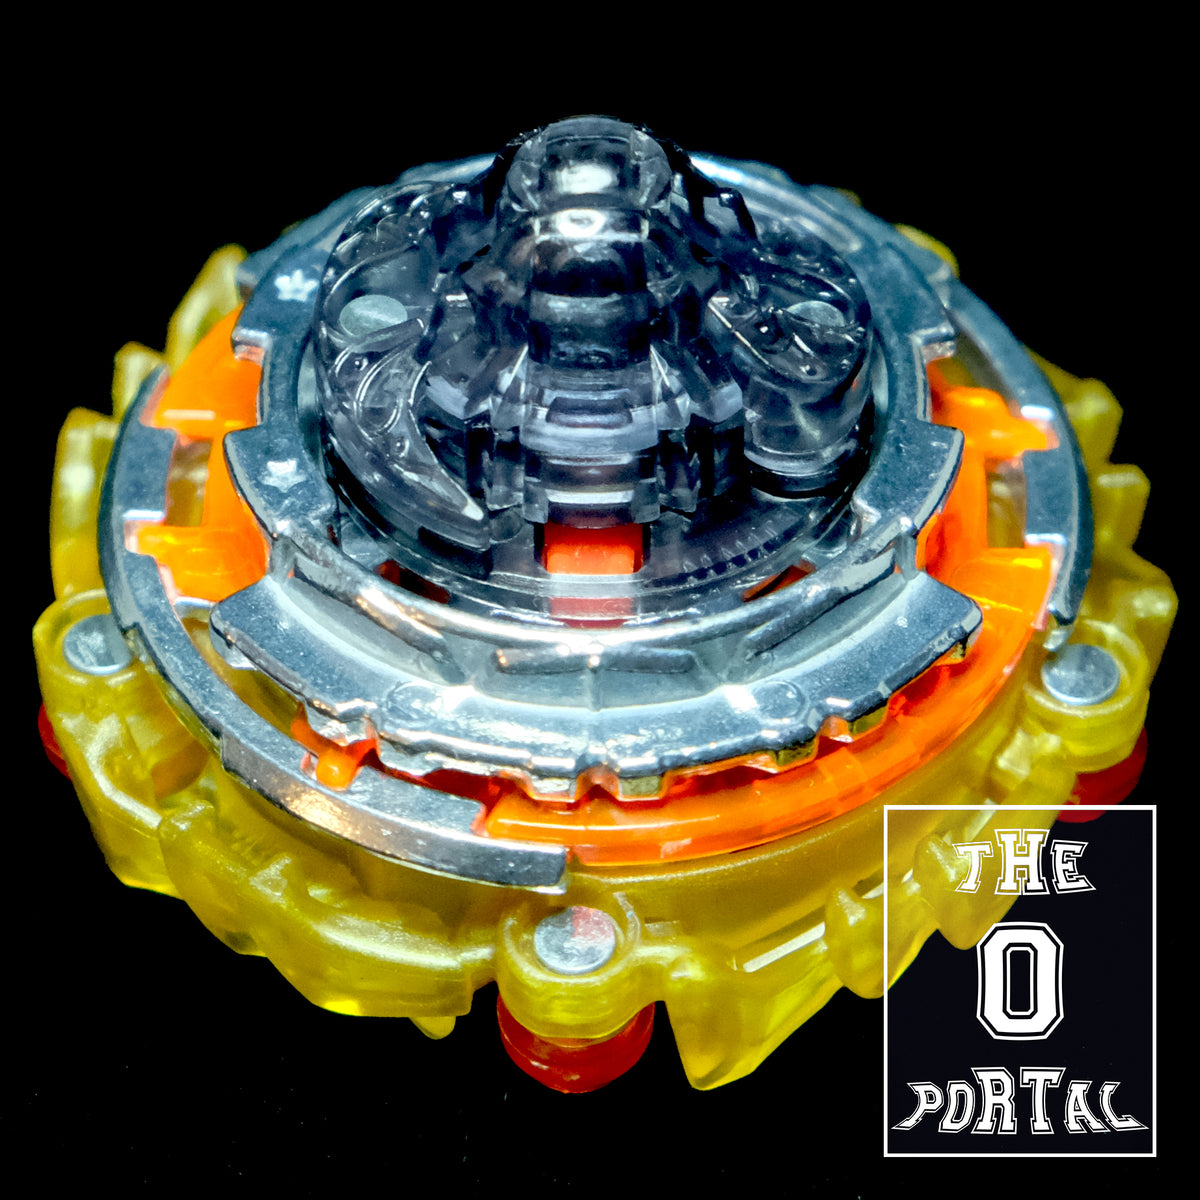 1S ONLY・New Details about   Takara Tomy Beyblade Burst SuperKing・B-176・Curse Deathscyther Layer 